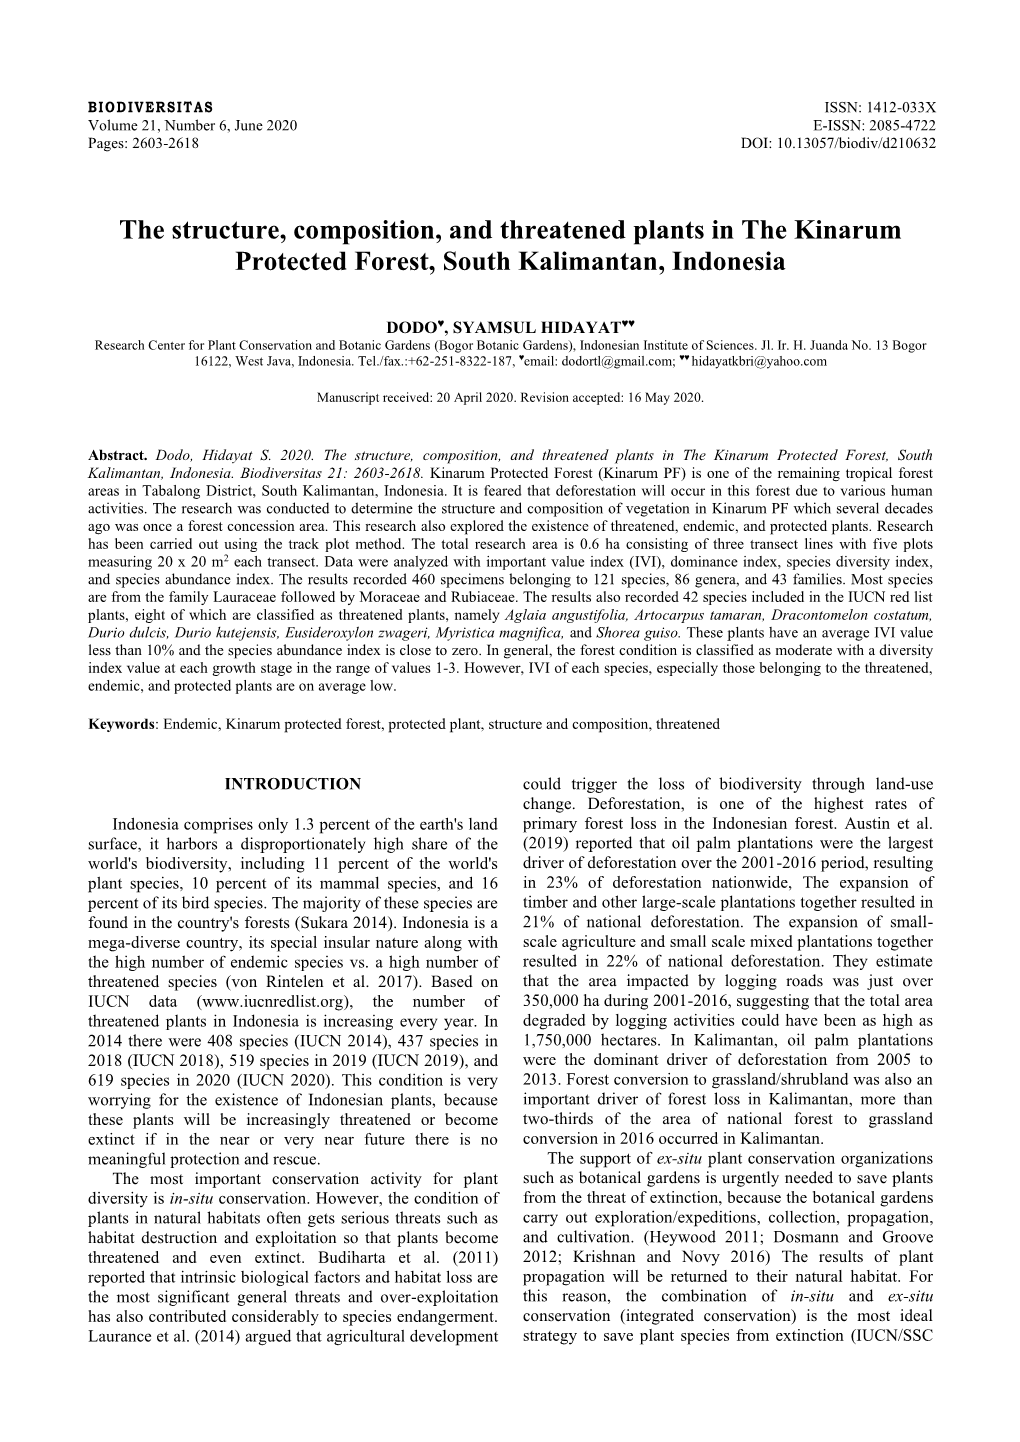 The Structure, Composition, and Threatened Plants in the Kinarum Protected Forest, South Kalimantan, Indonesia